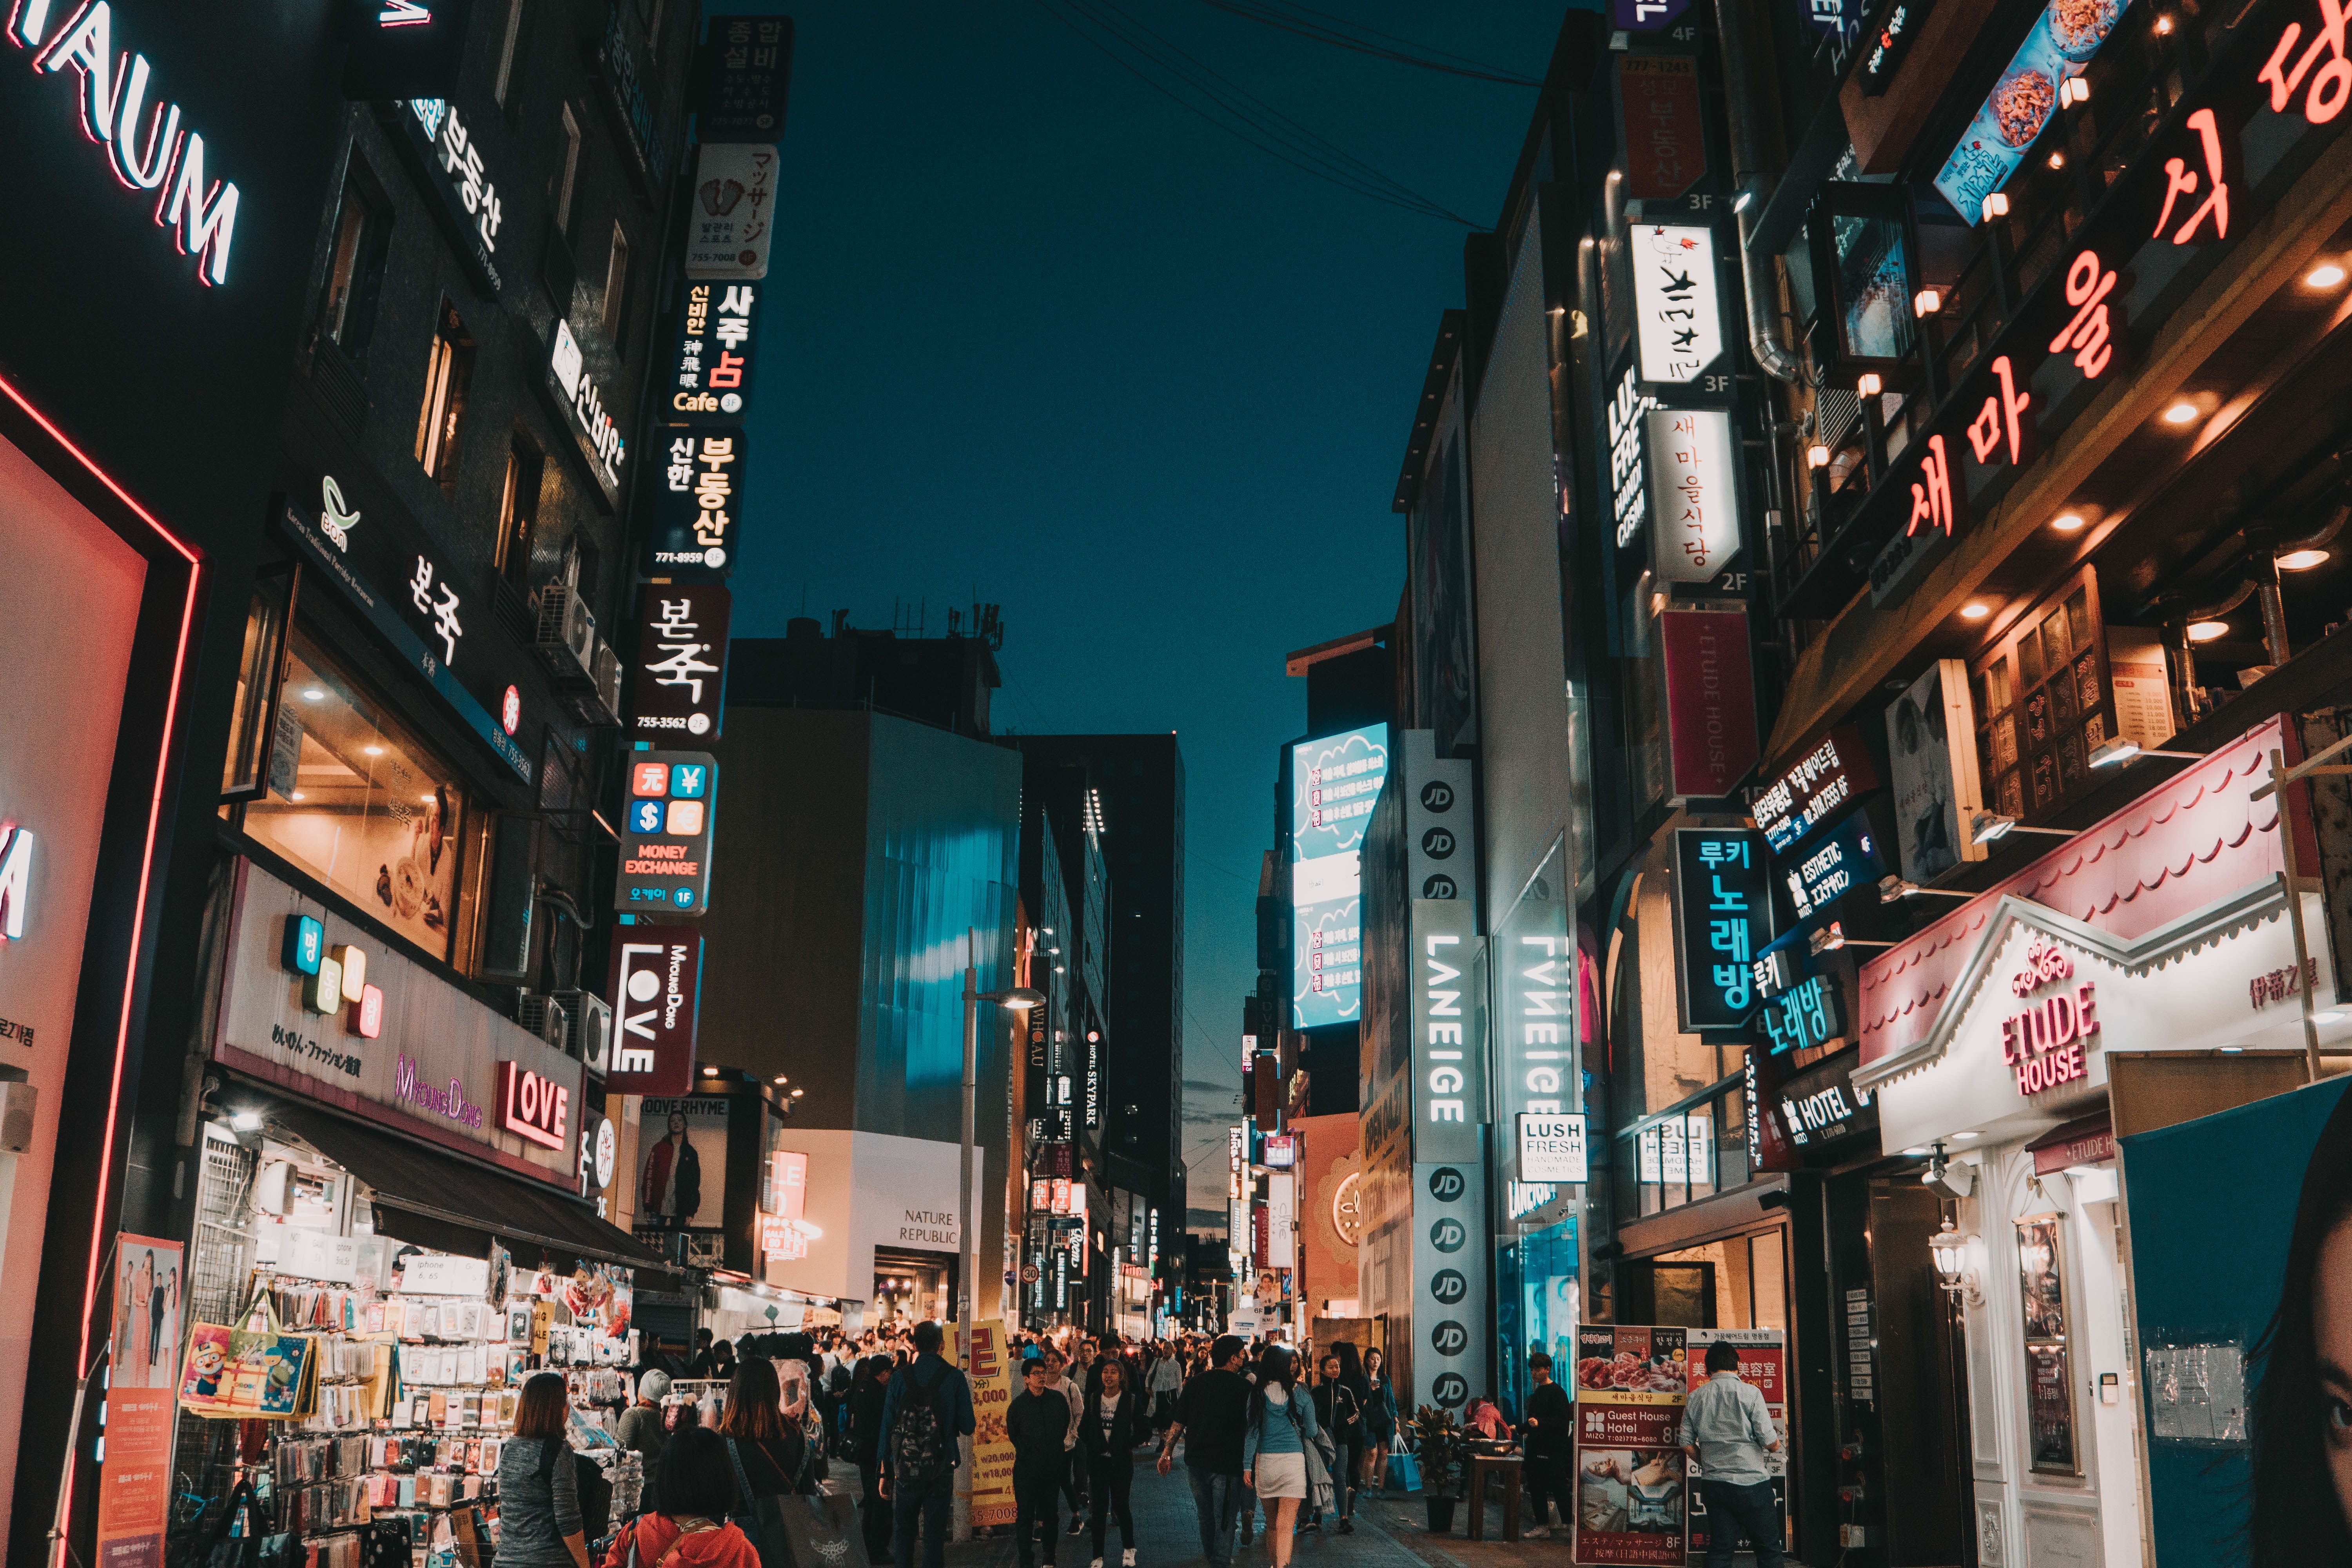 A bustling street in Seoul, South Korea at night with neon signs and people walking around. - Seoul